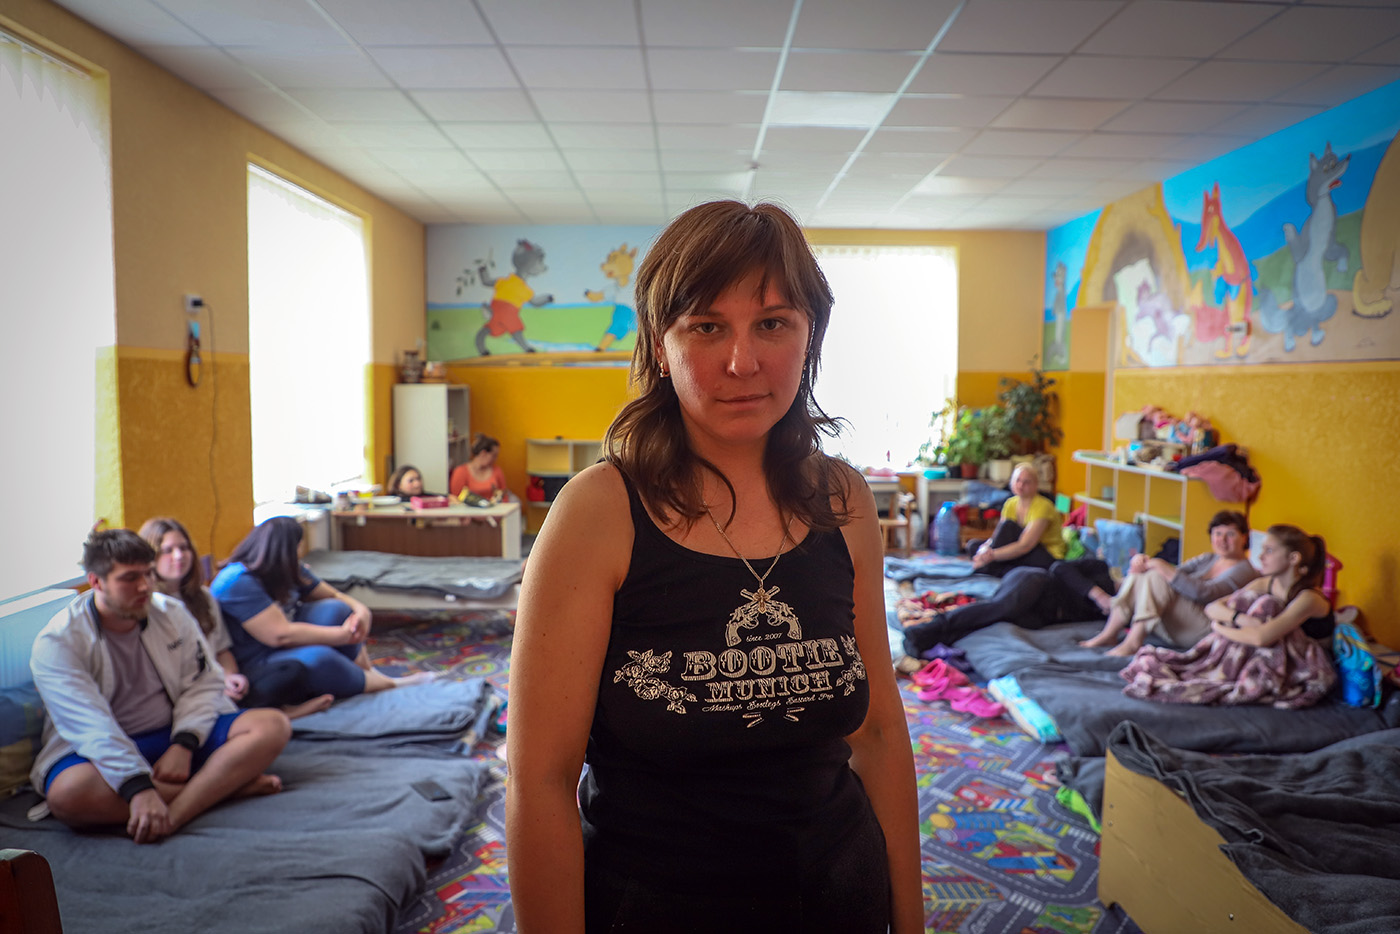 Irina, 31, now lives with 12 other people in this room in western Ukraine. © HIA. Used with permission.